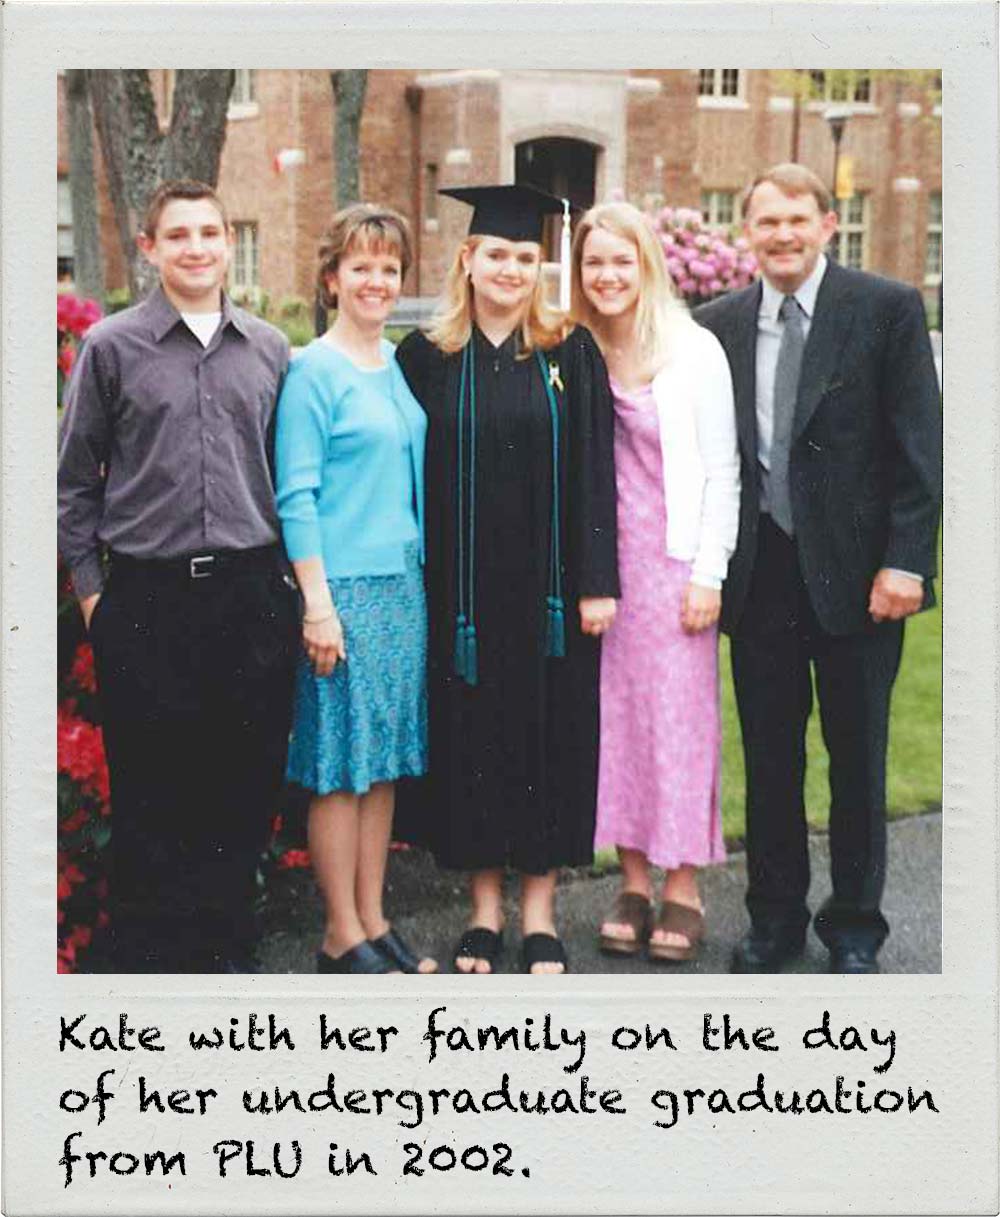 Kate with her family on the day of her undergraduate graduation from PLU in 2002.